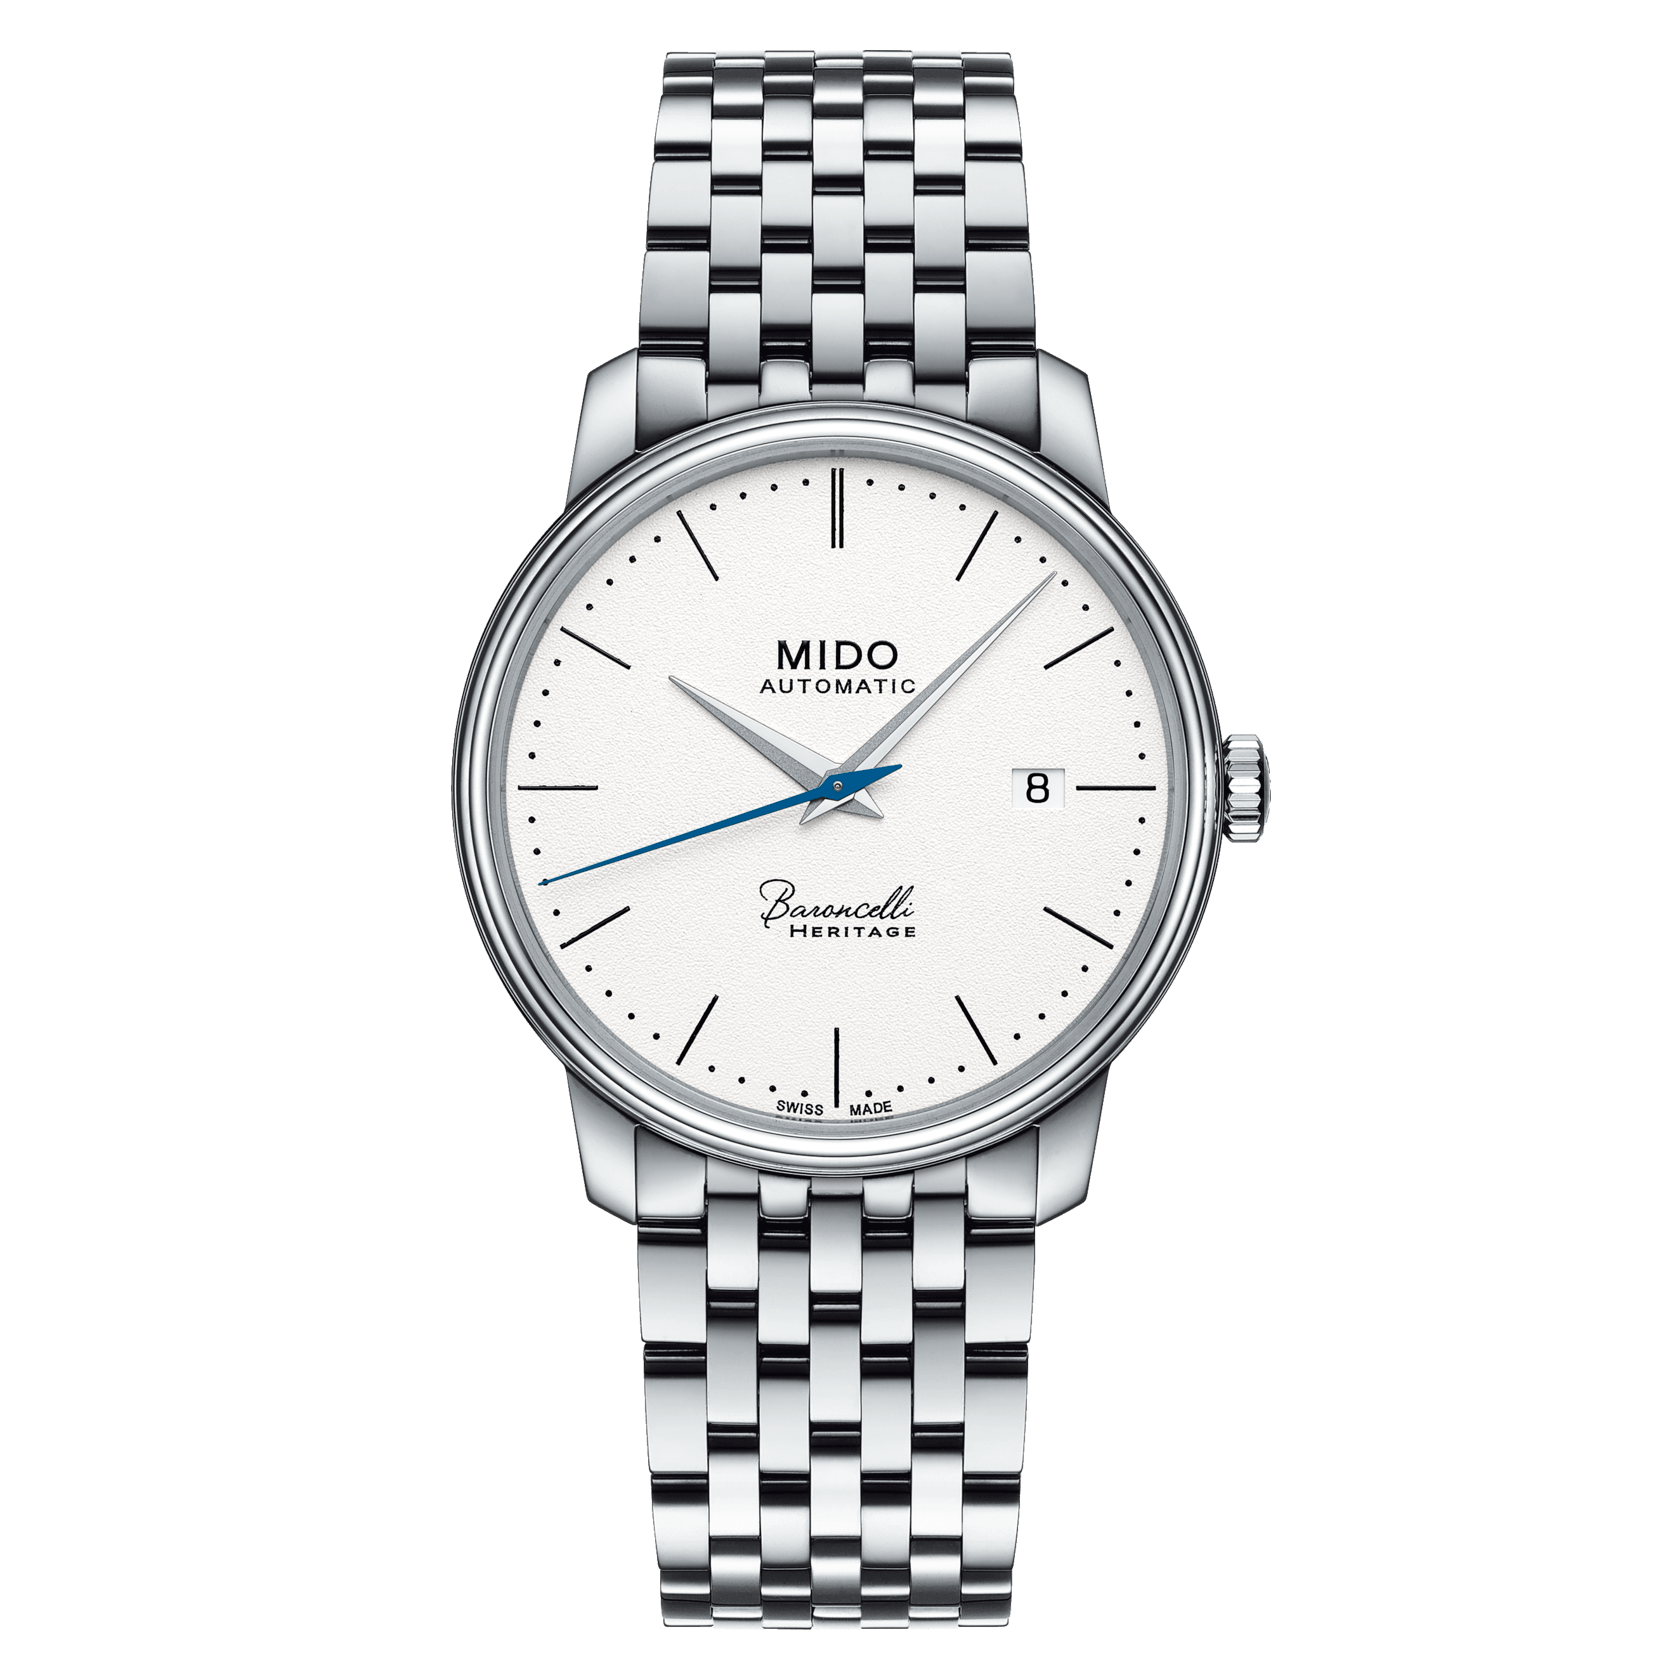 Mido Baroncelli Heritage Slim White Dial Stainless Steel Men's Watch M0274071101000